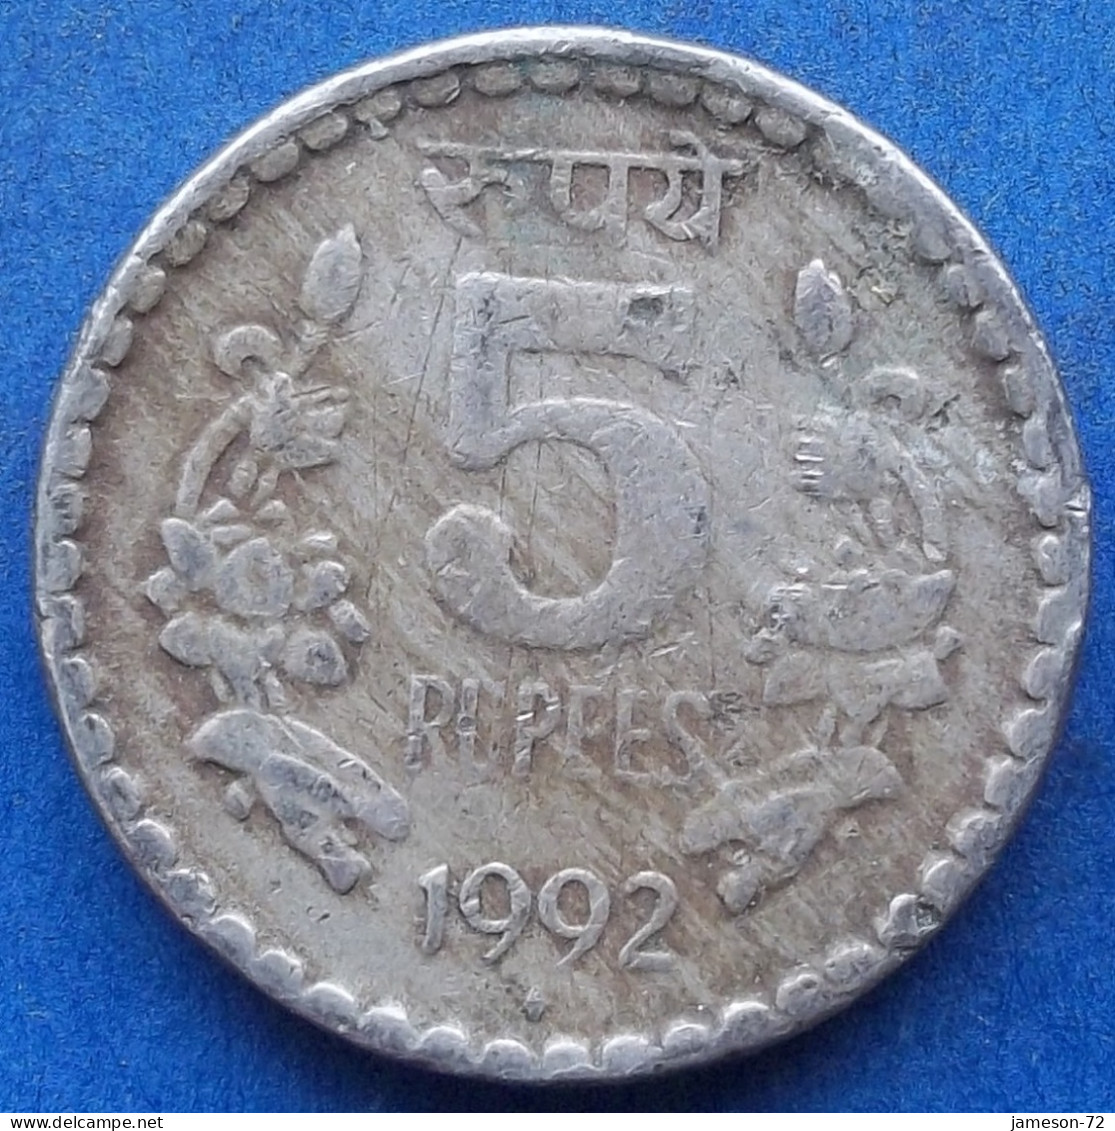 INDIA - 5 Rupees 1992 "Lotus Flowers" KM# 154.1 Republic Decimal Coinage (1957) - Edelweiss Coins - Georgien